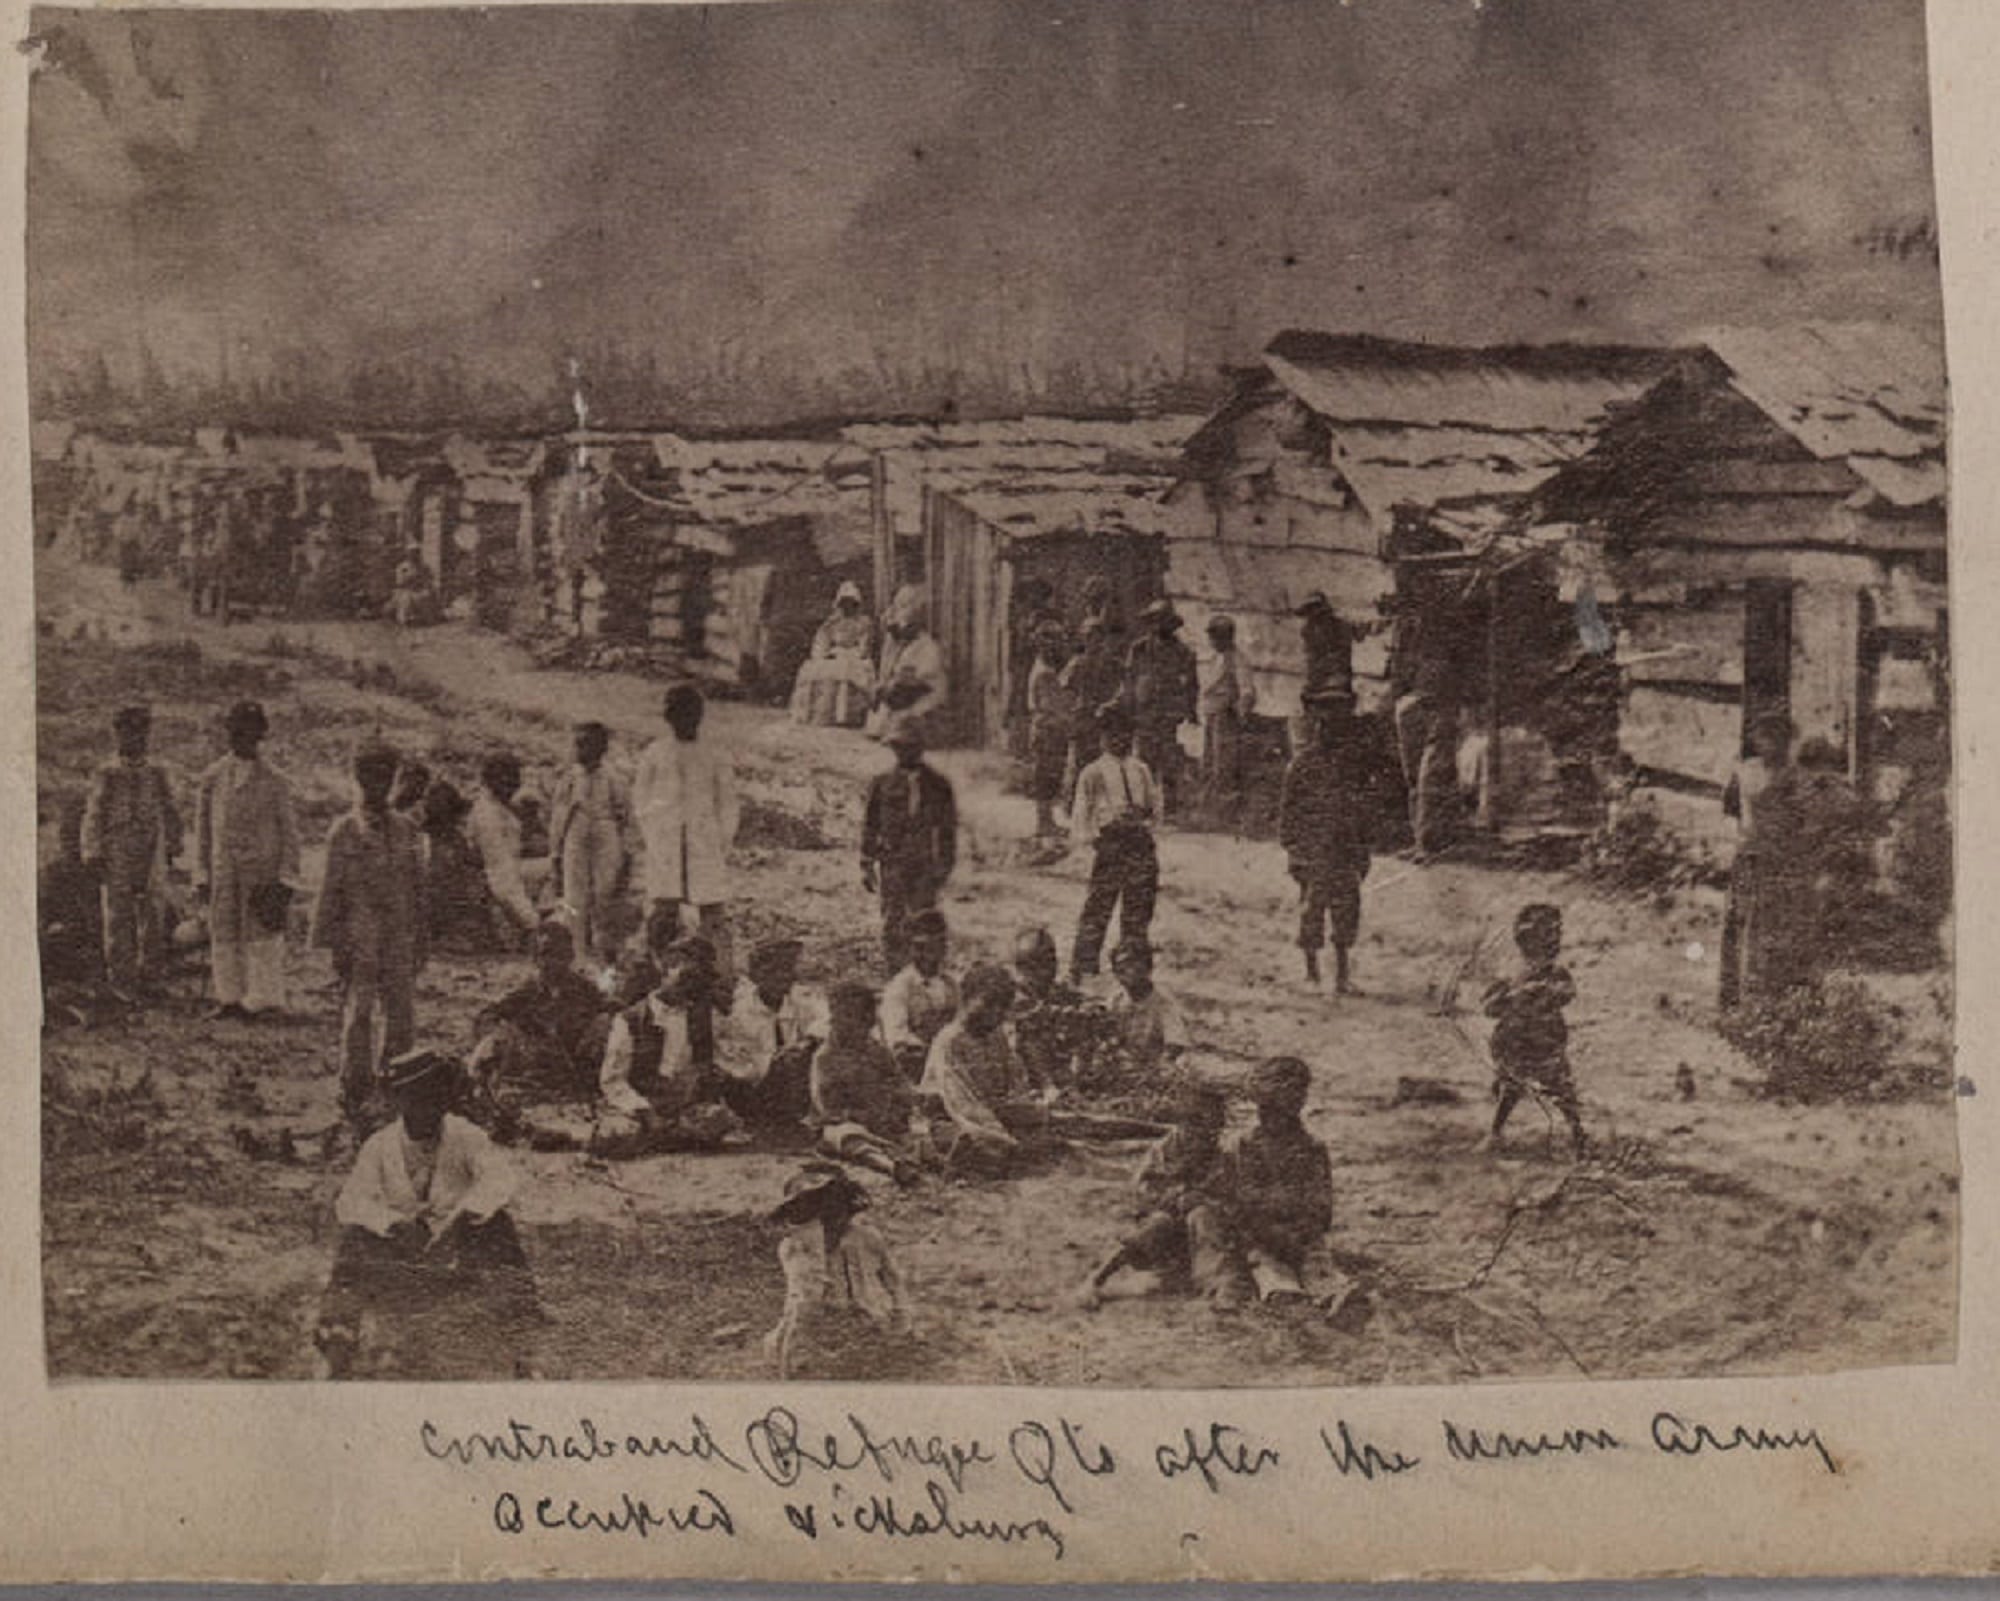 Contraband Refugee Quarters after the Union Army occupied Vicksburg, 1863–65, Huntington Library, James E. Taylor Collection, Scrapbook One and Two.